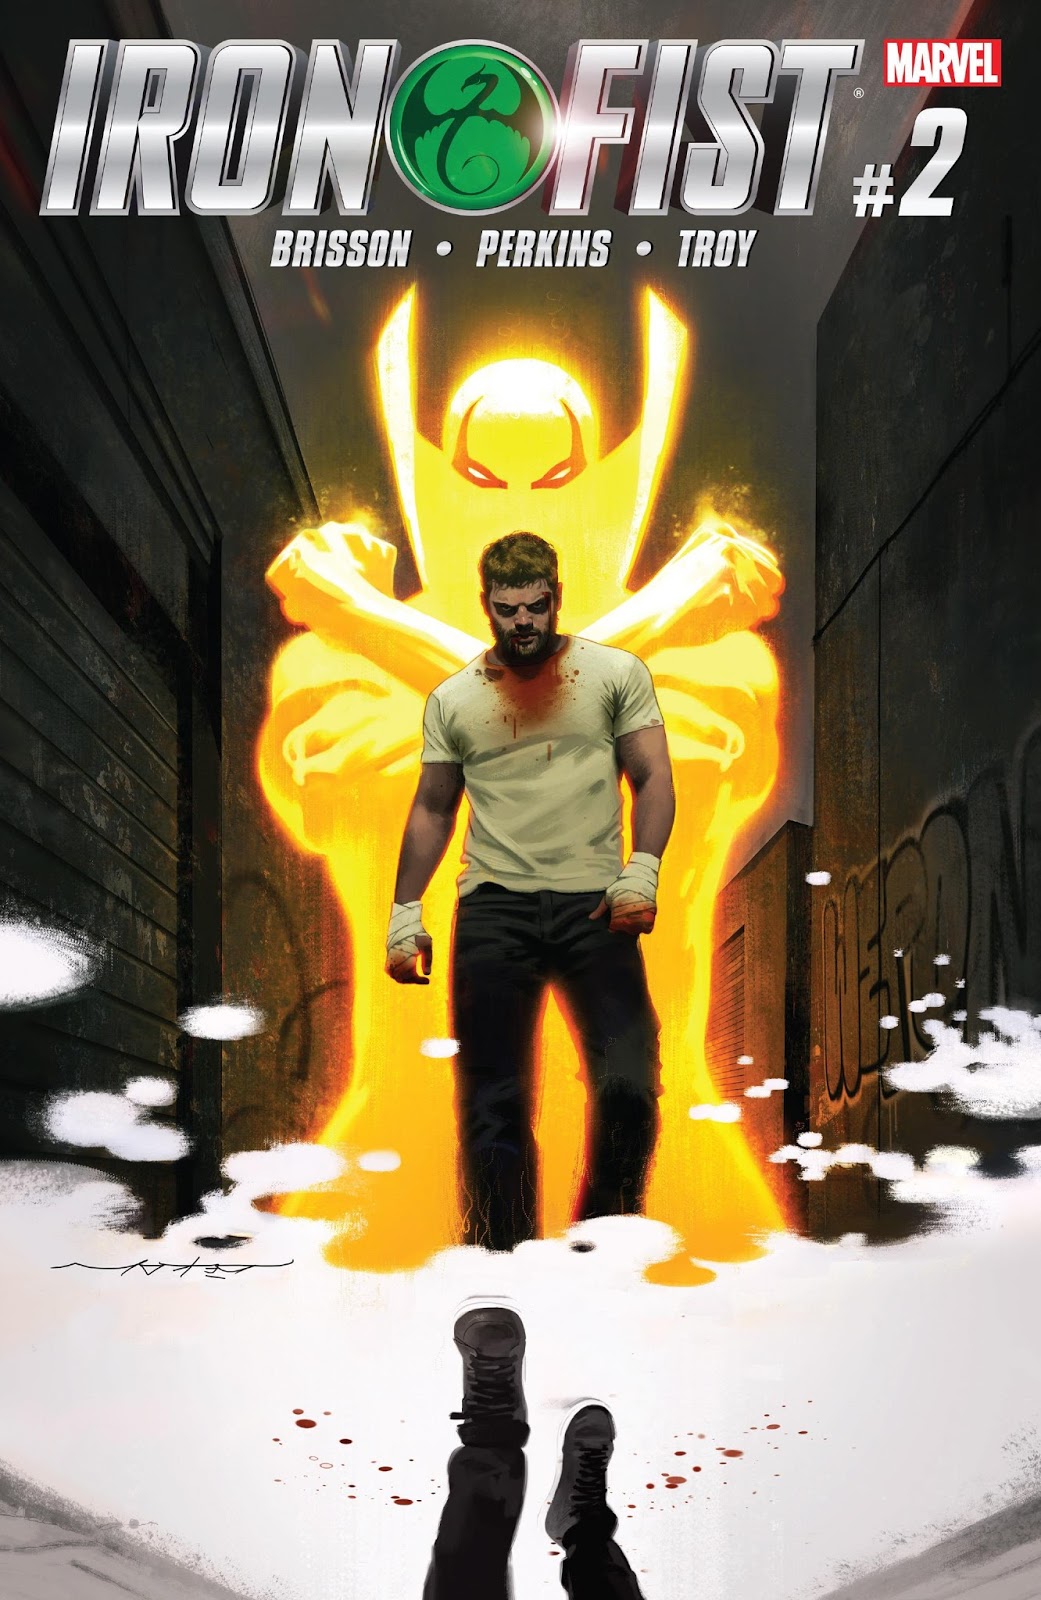 The new Iron Fist is just who we thought - but the mystery of his powers  continues in Iron Fist #2